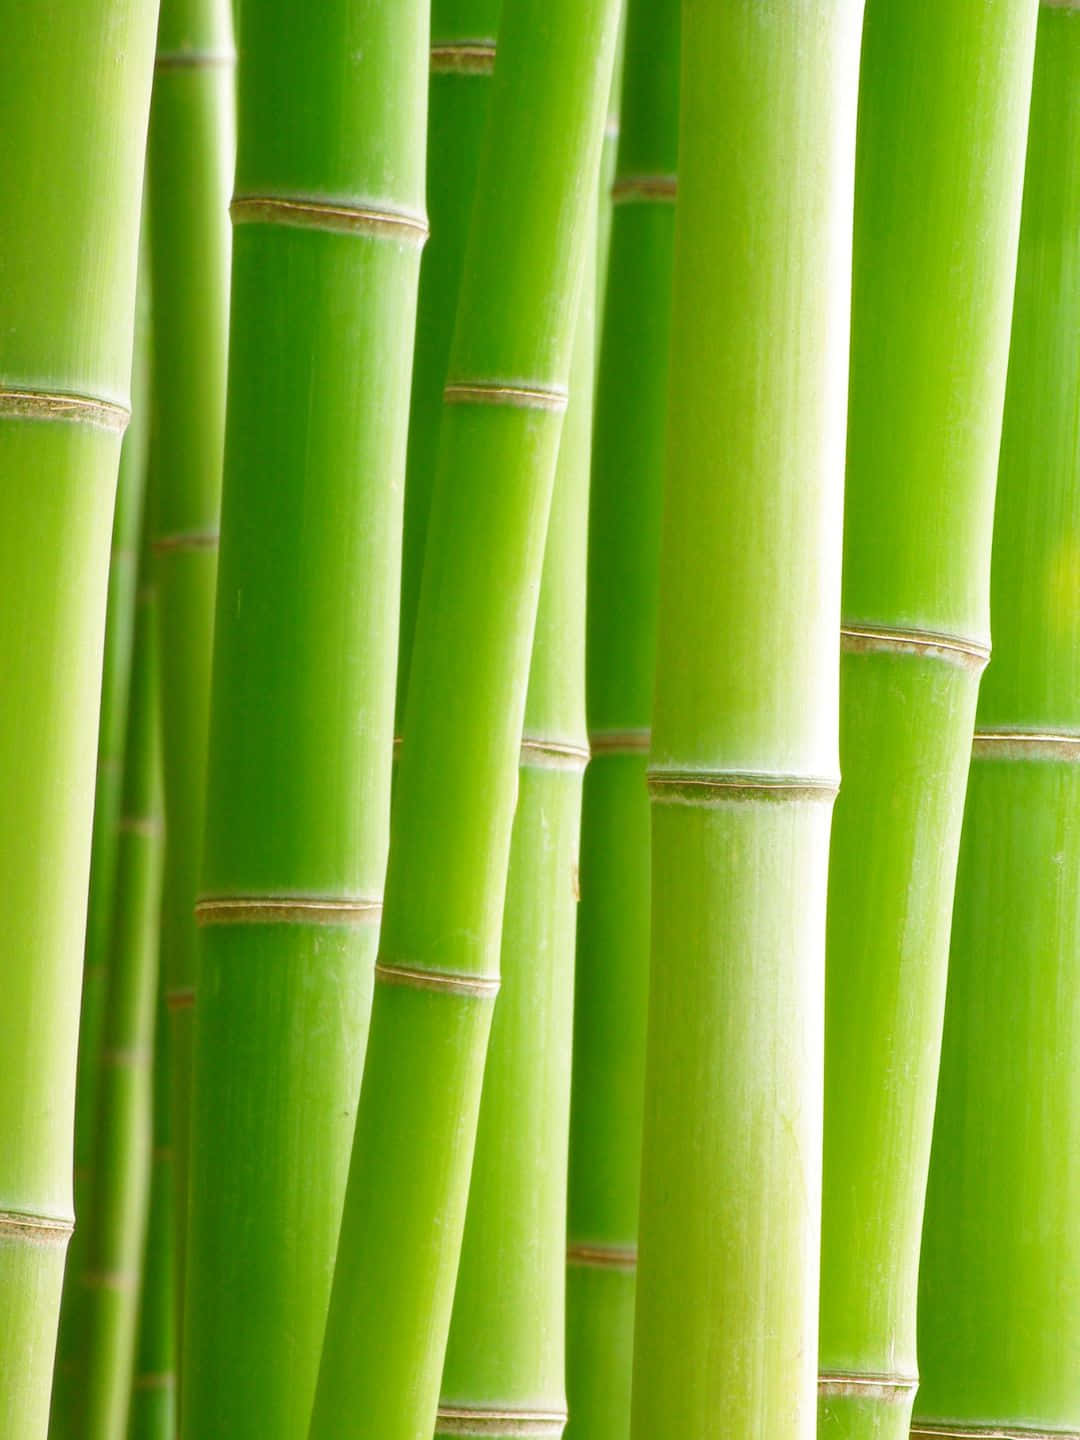 Download 1440p Bamboo Background Road Full Of Bamboo Trees  Wallpaperscom